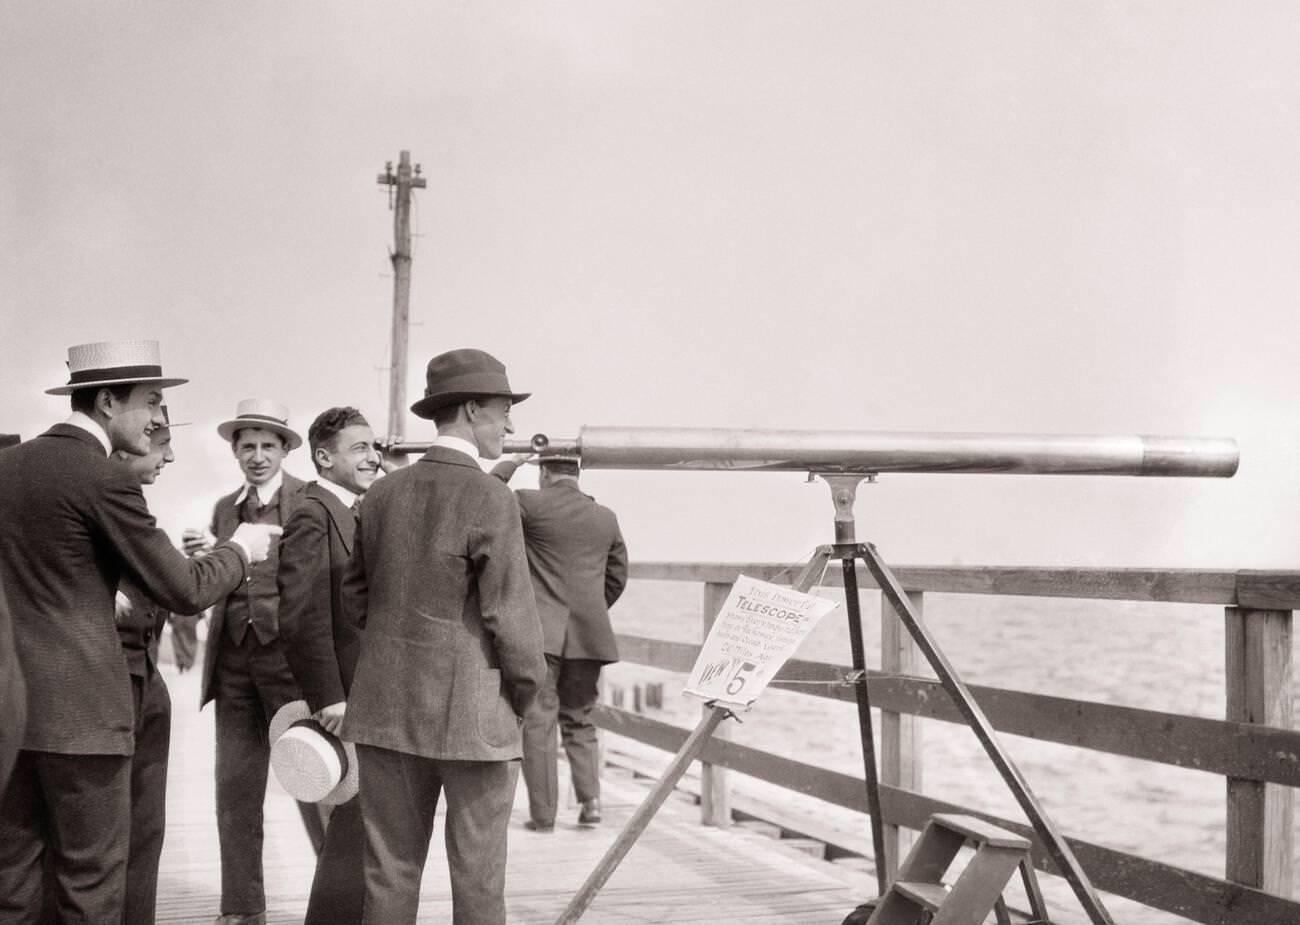 Telescope Viewing At Coney Island For A Nickel, Brooklyn, 1916